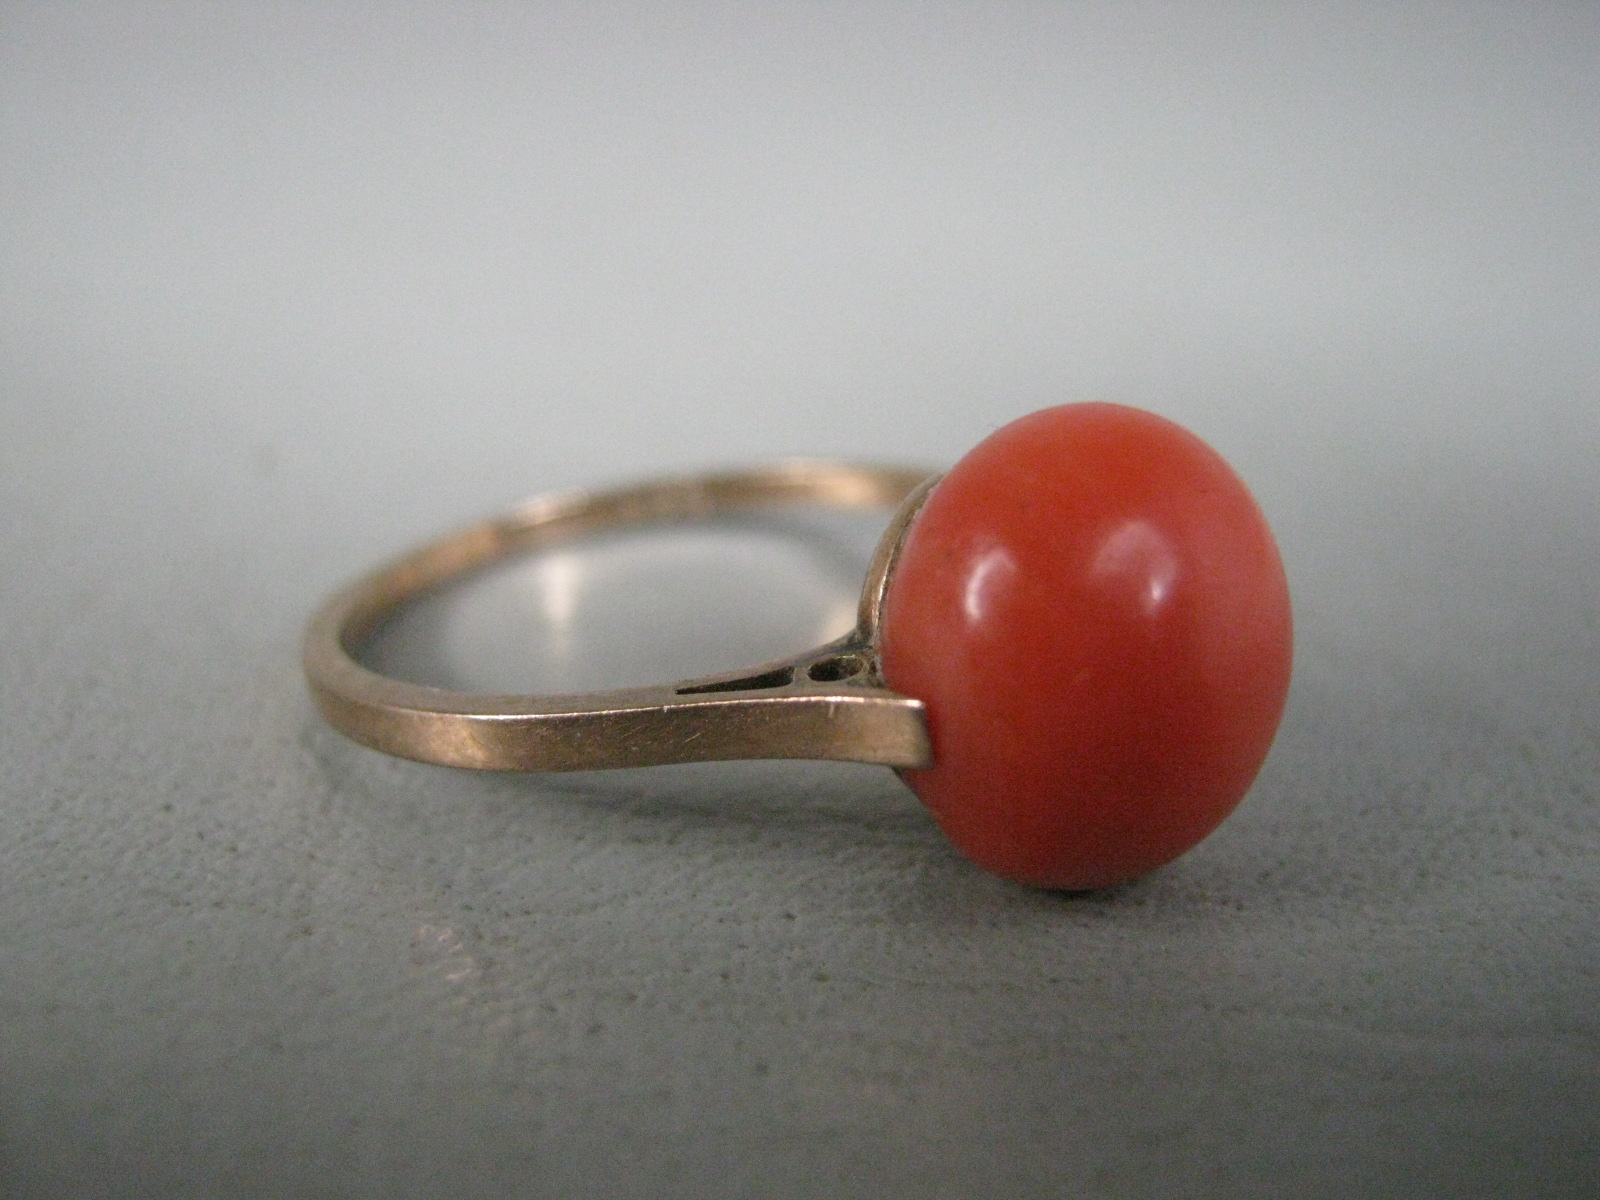 Vtg Antique 585 14K 14 Karat Yellow Gold Red Coral Ring Size 7 Estate Jewelry NR